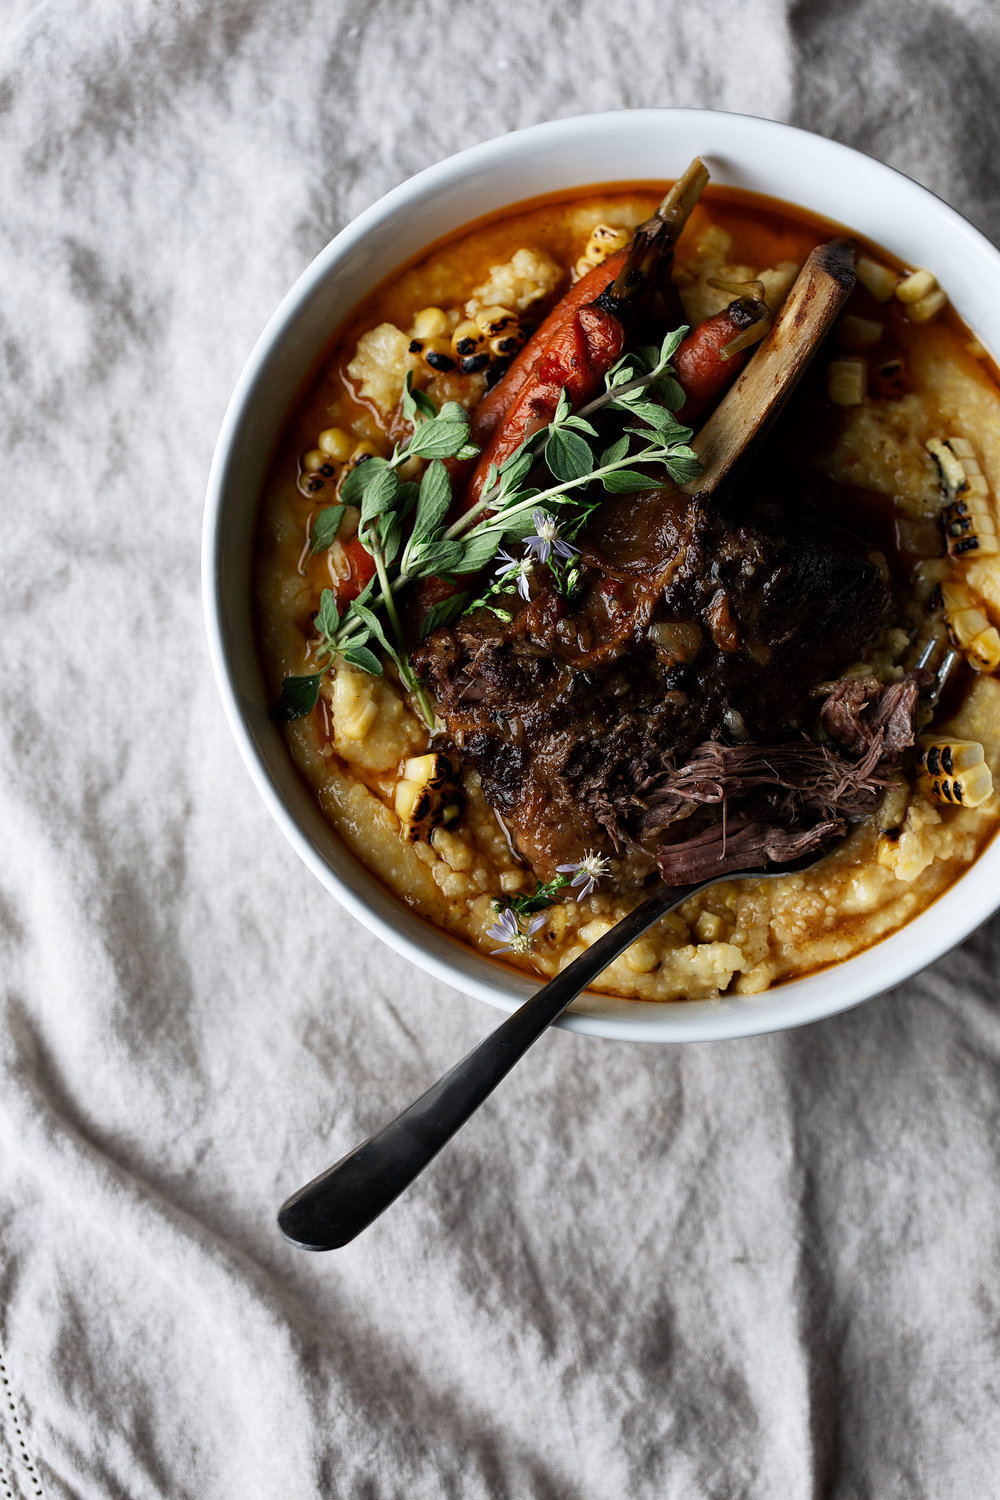 Chili Braised Short Ribs with Carrots and Charred Corn Polenta recipe from cooking with cocktail rings